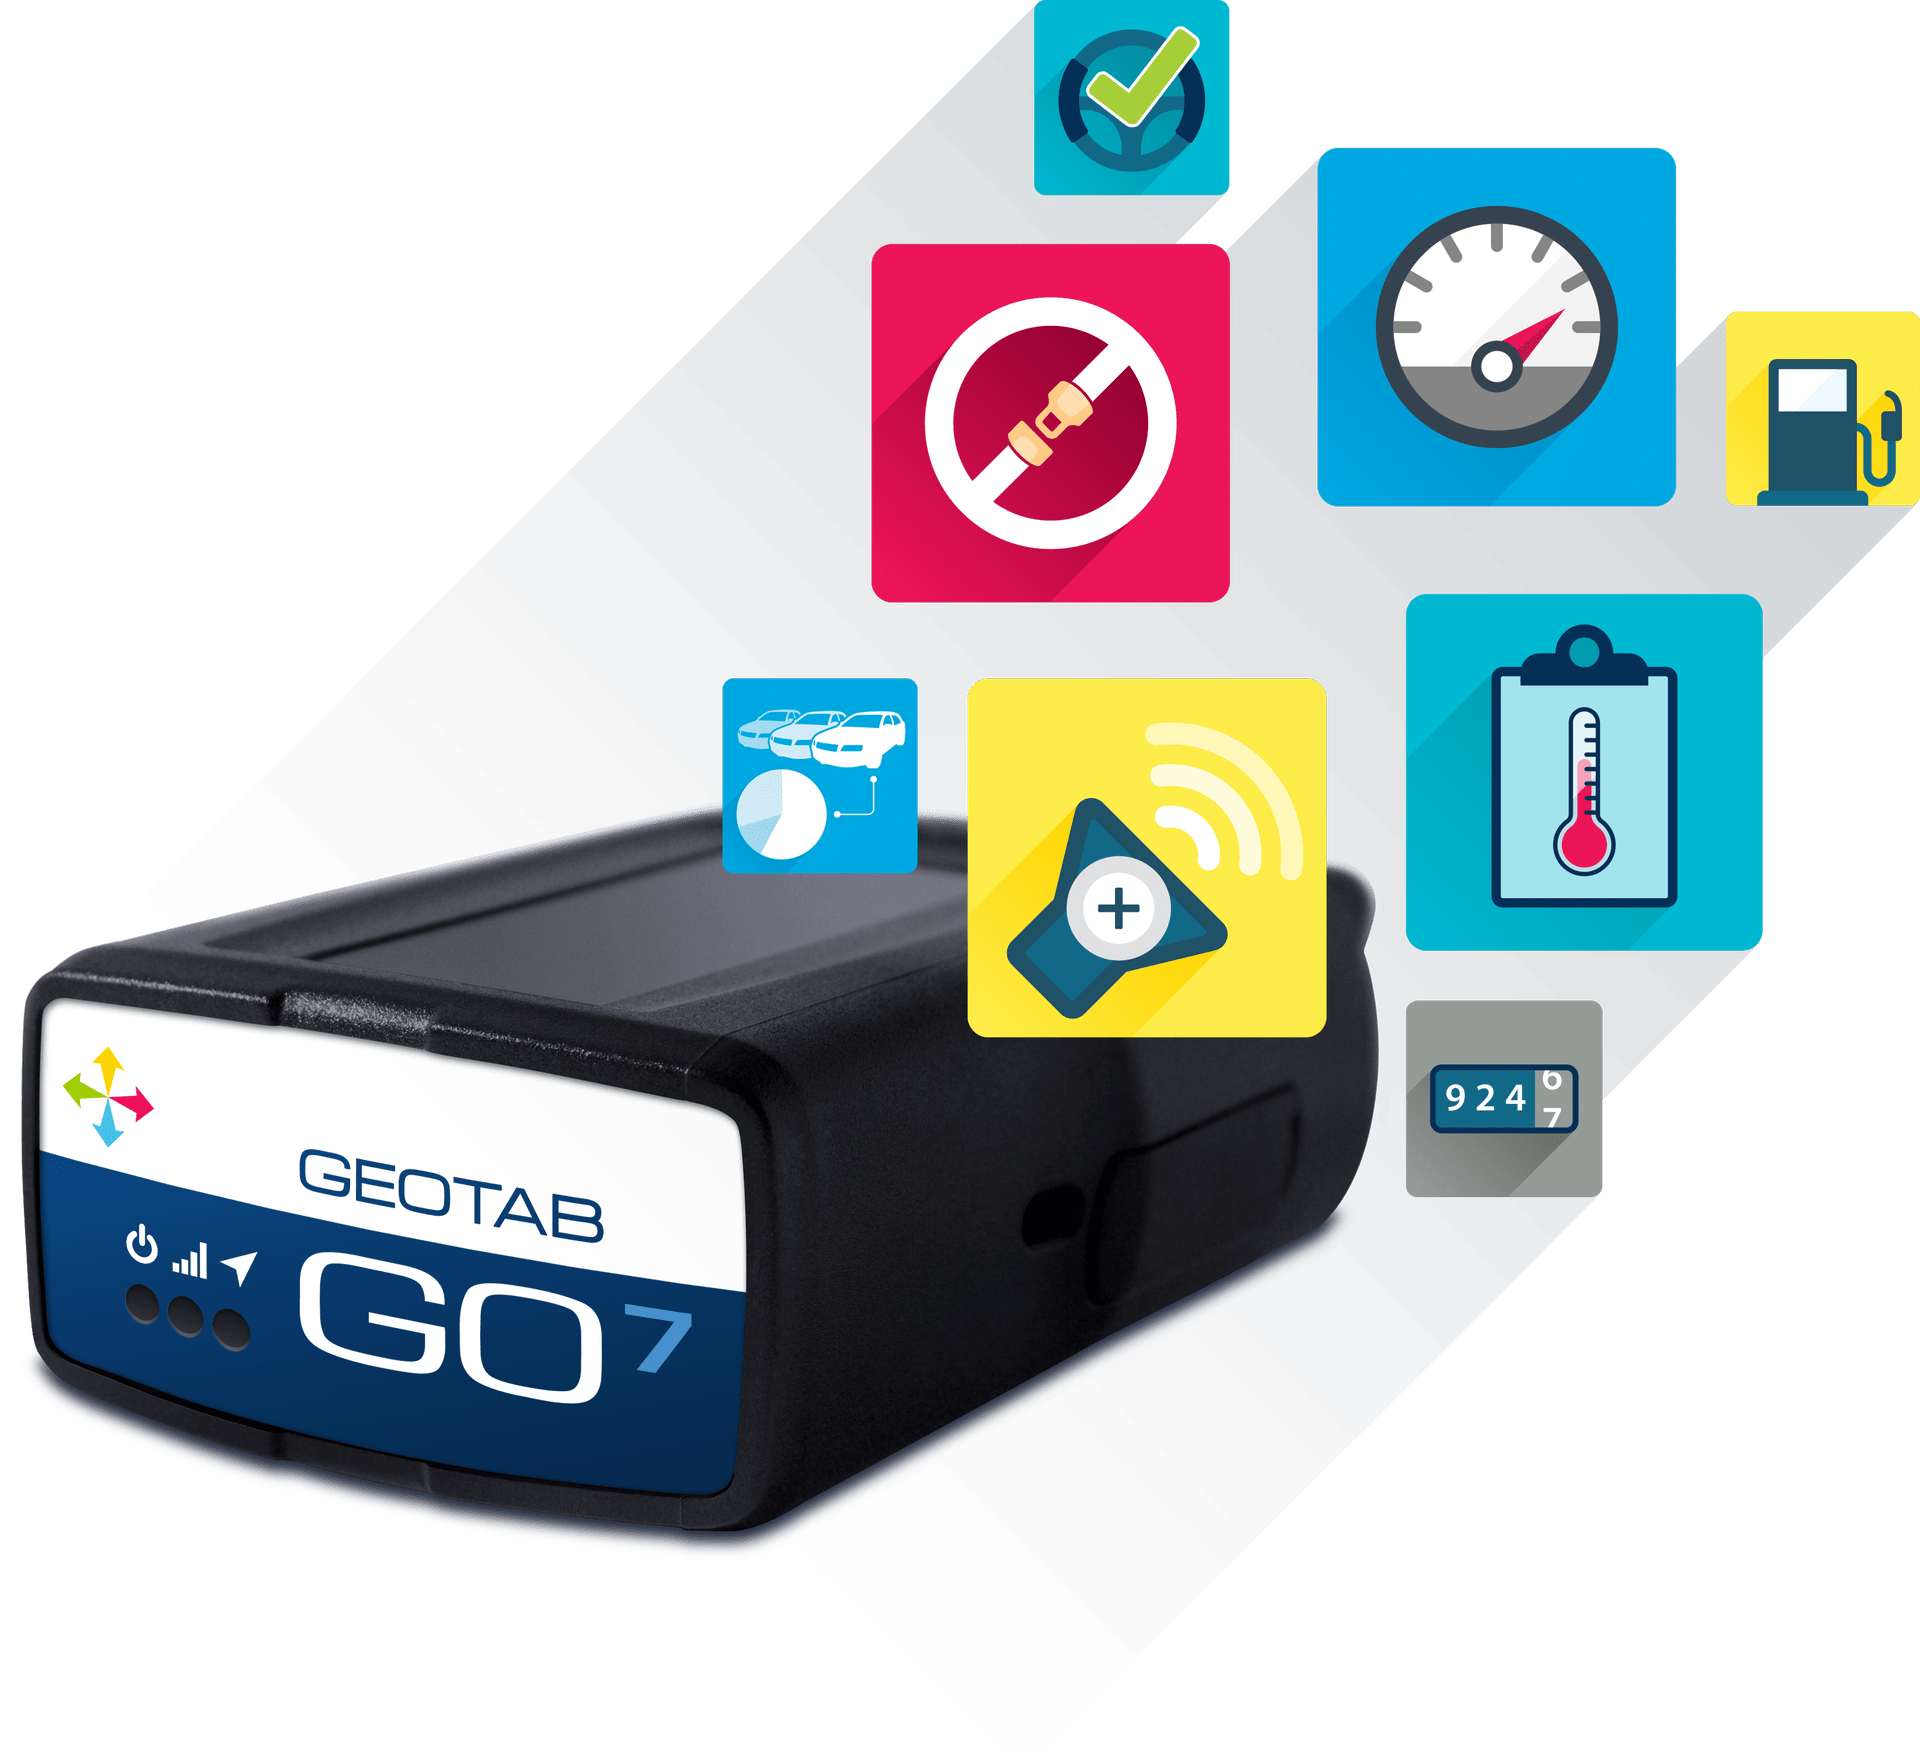 PUBLIC go device angle 1 w marketplace icons fullhd